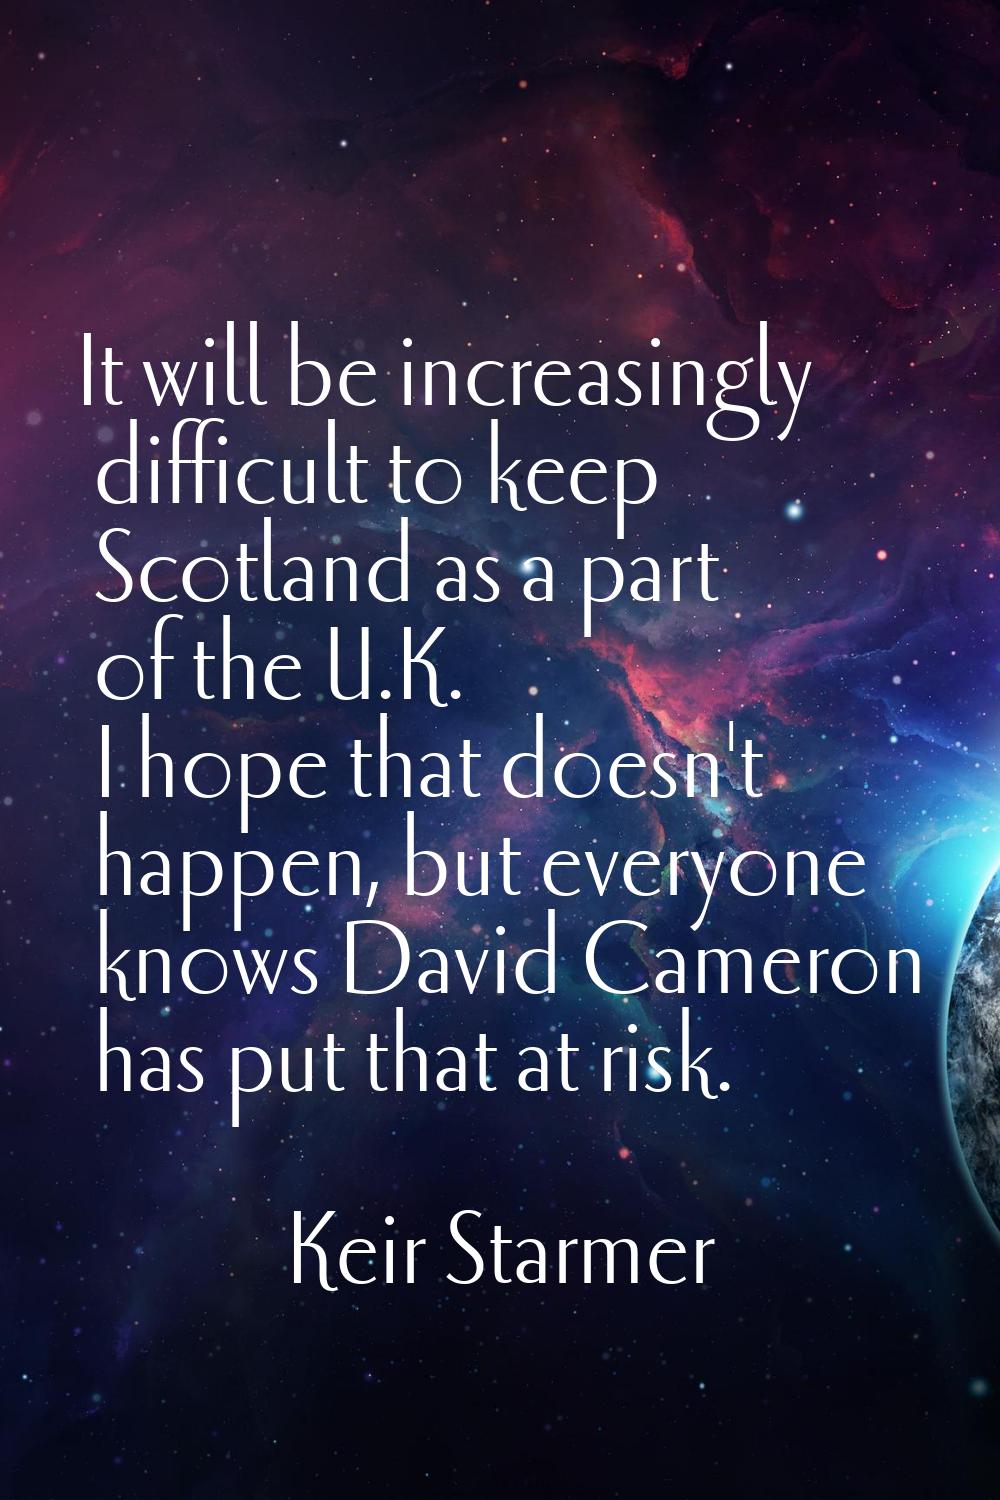 It will be increasingly difficult to keep Scotland as a part of the U.K. I hope that doesn't happen